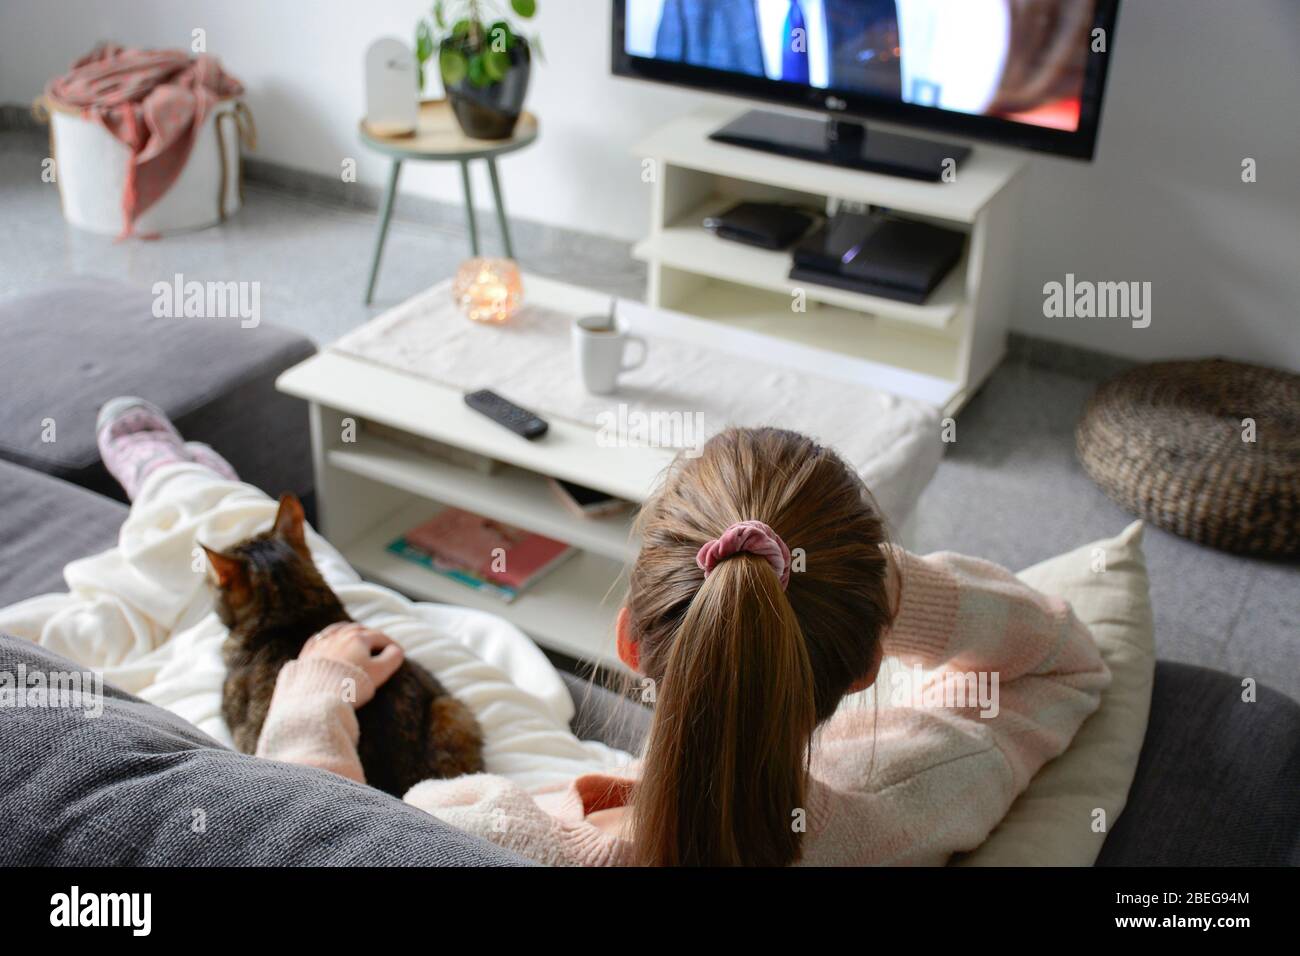 Domestic life with pet. A young woman is sitting on the couch with her cat on her lap in the living room. She watches TV while stroking her cat. Stock Photo